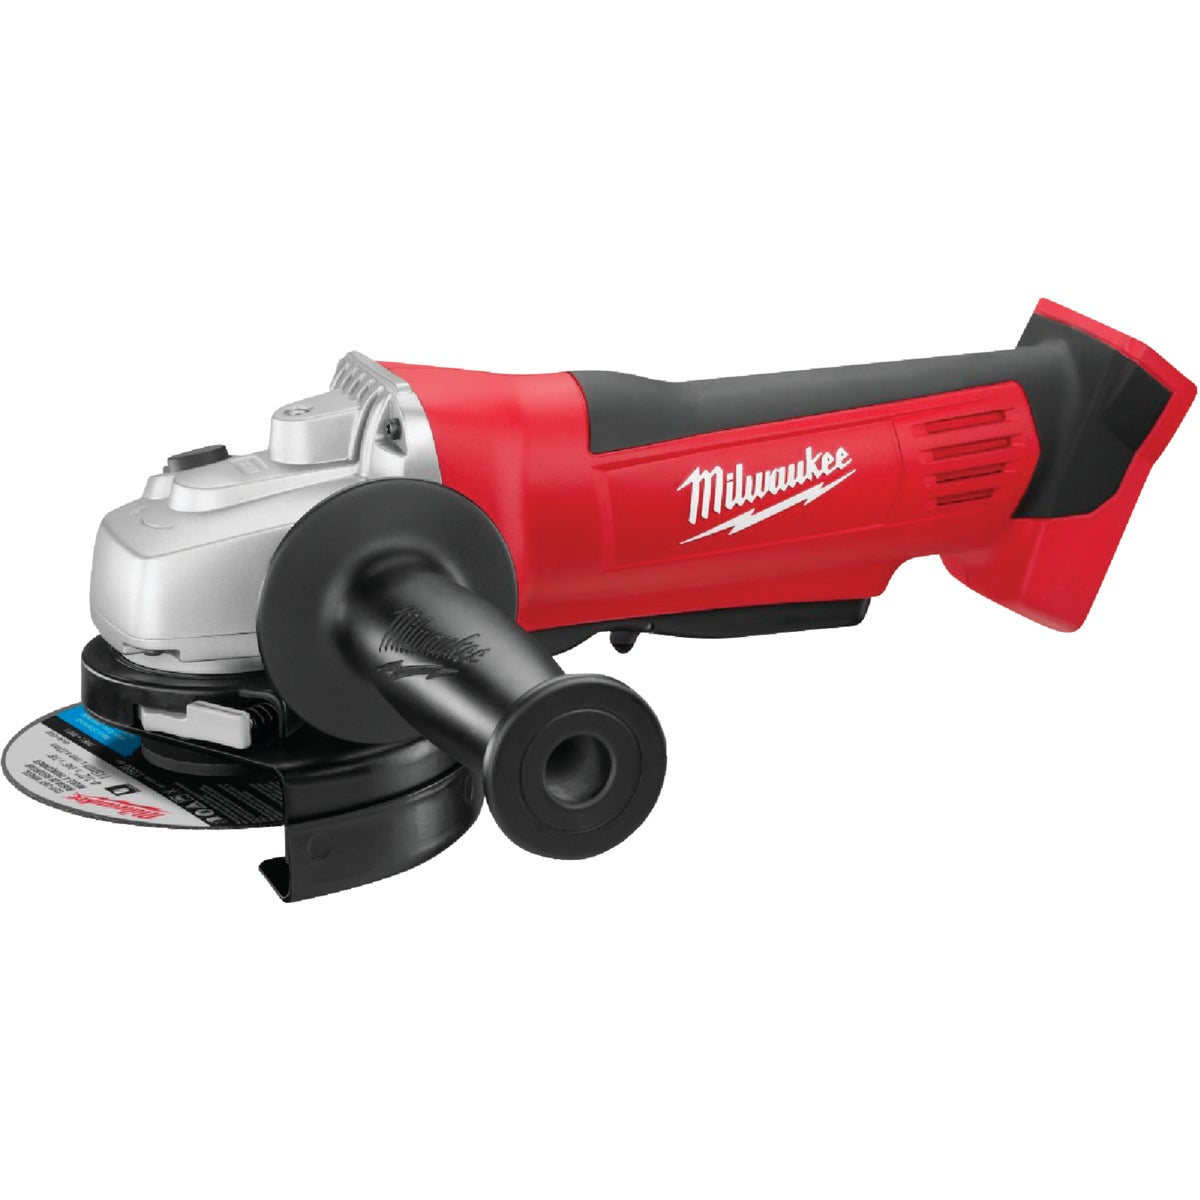 Milwaukee M18 18-Volt Lithium-Ion 4-1/2 In. - 5 In. Brushless Cordless Grinder with Paddle Switch (Tool Only)